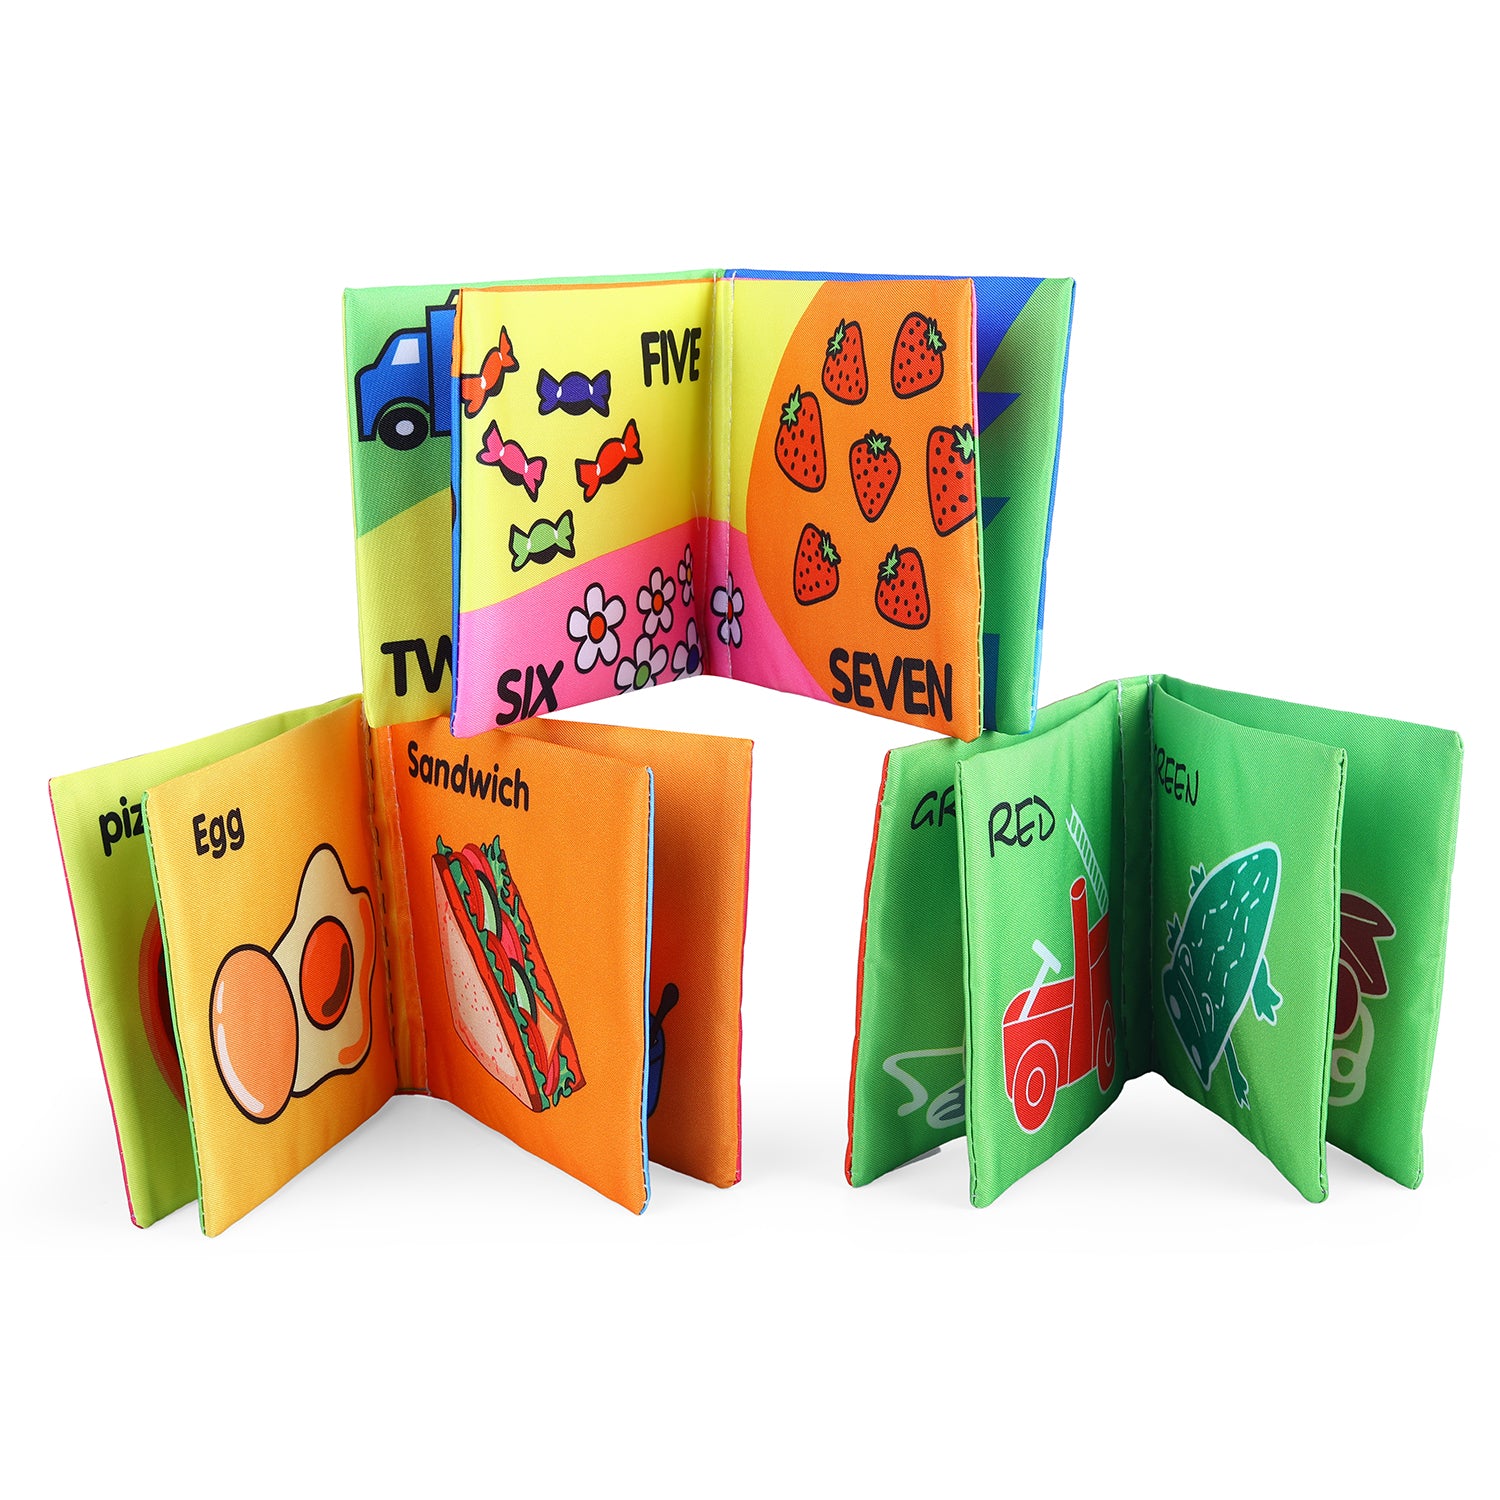 Numbers Animals Shapes Colours Food Occupations Baby Educational Cloth Book with Sound Paper Set of 6 - Multicolour